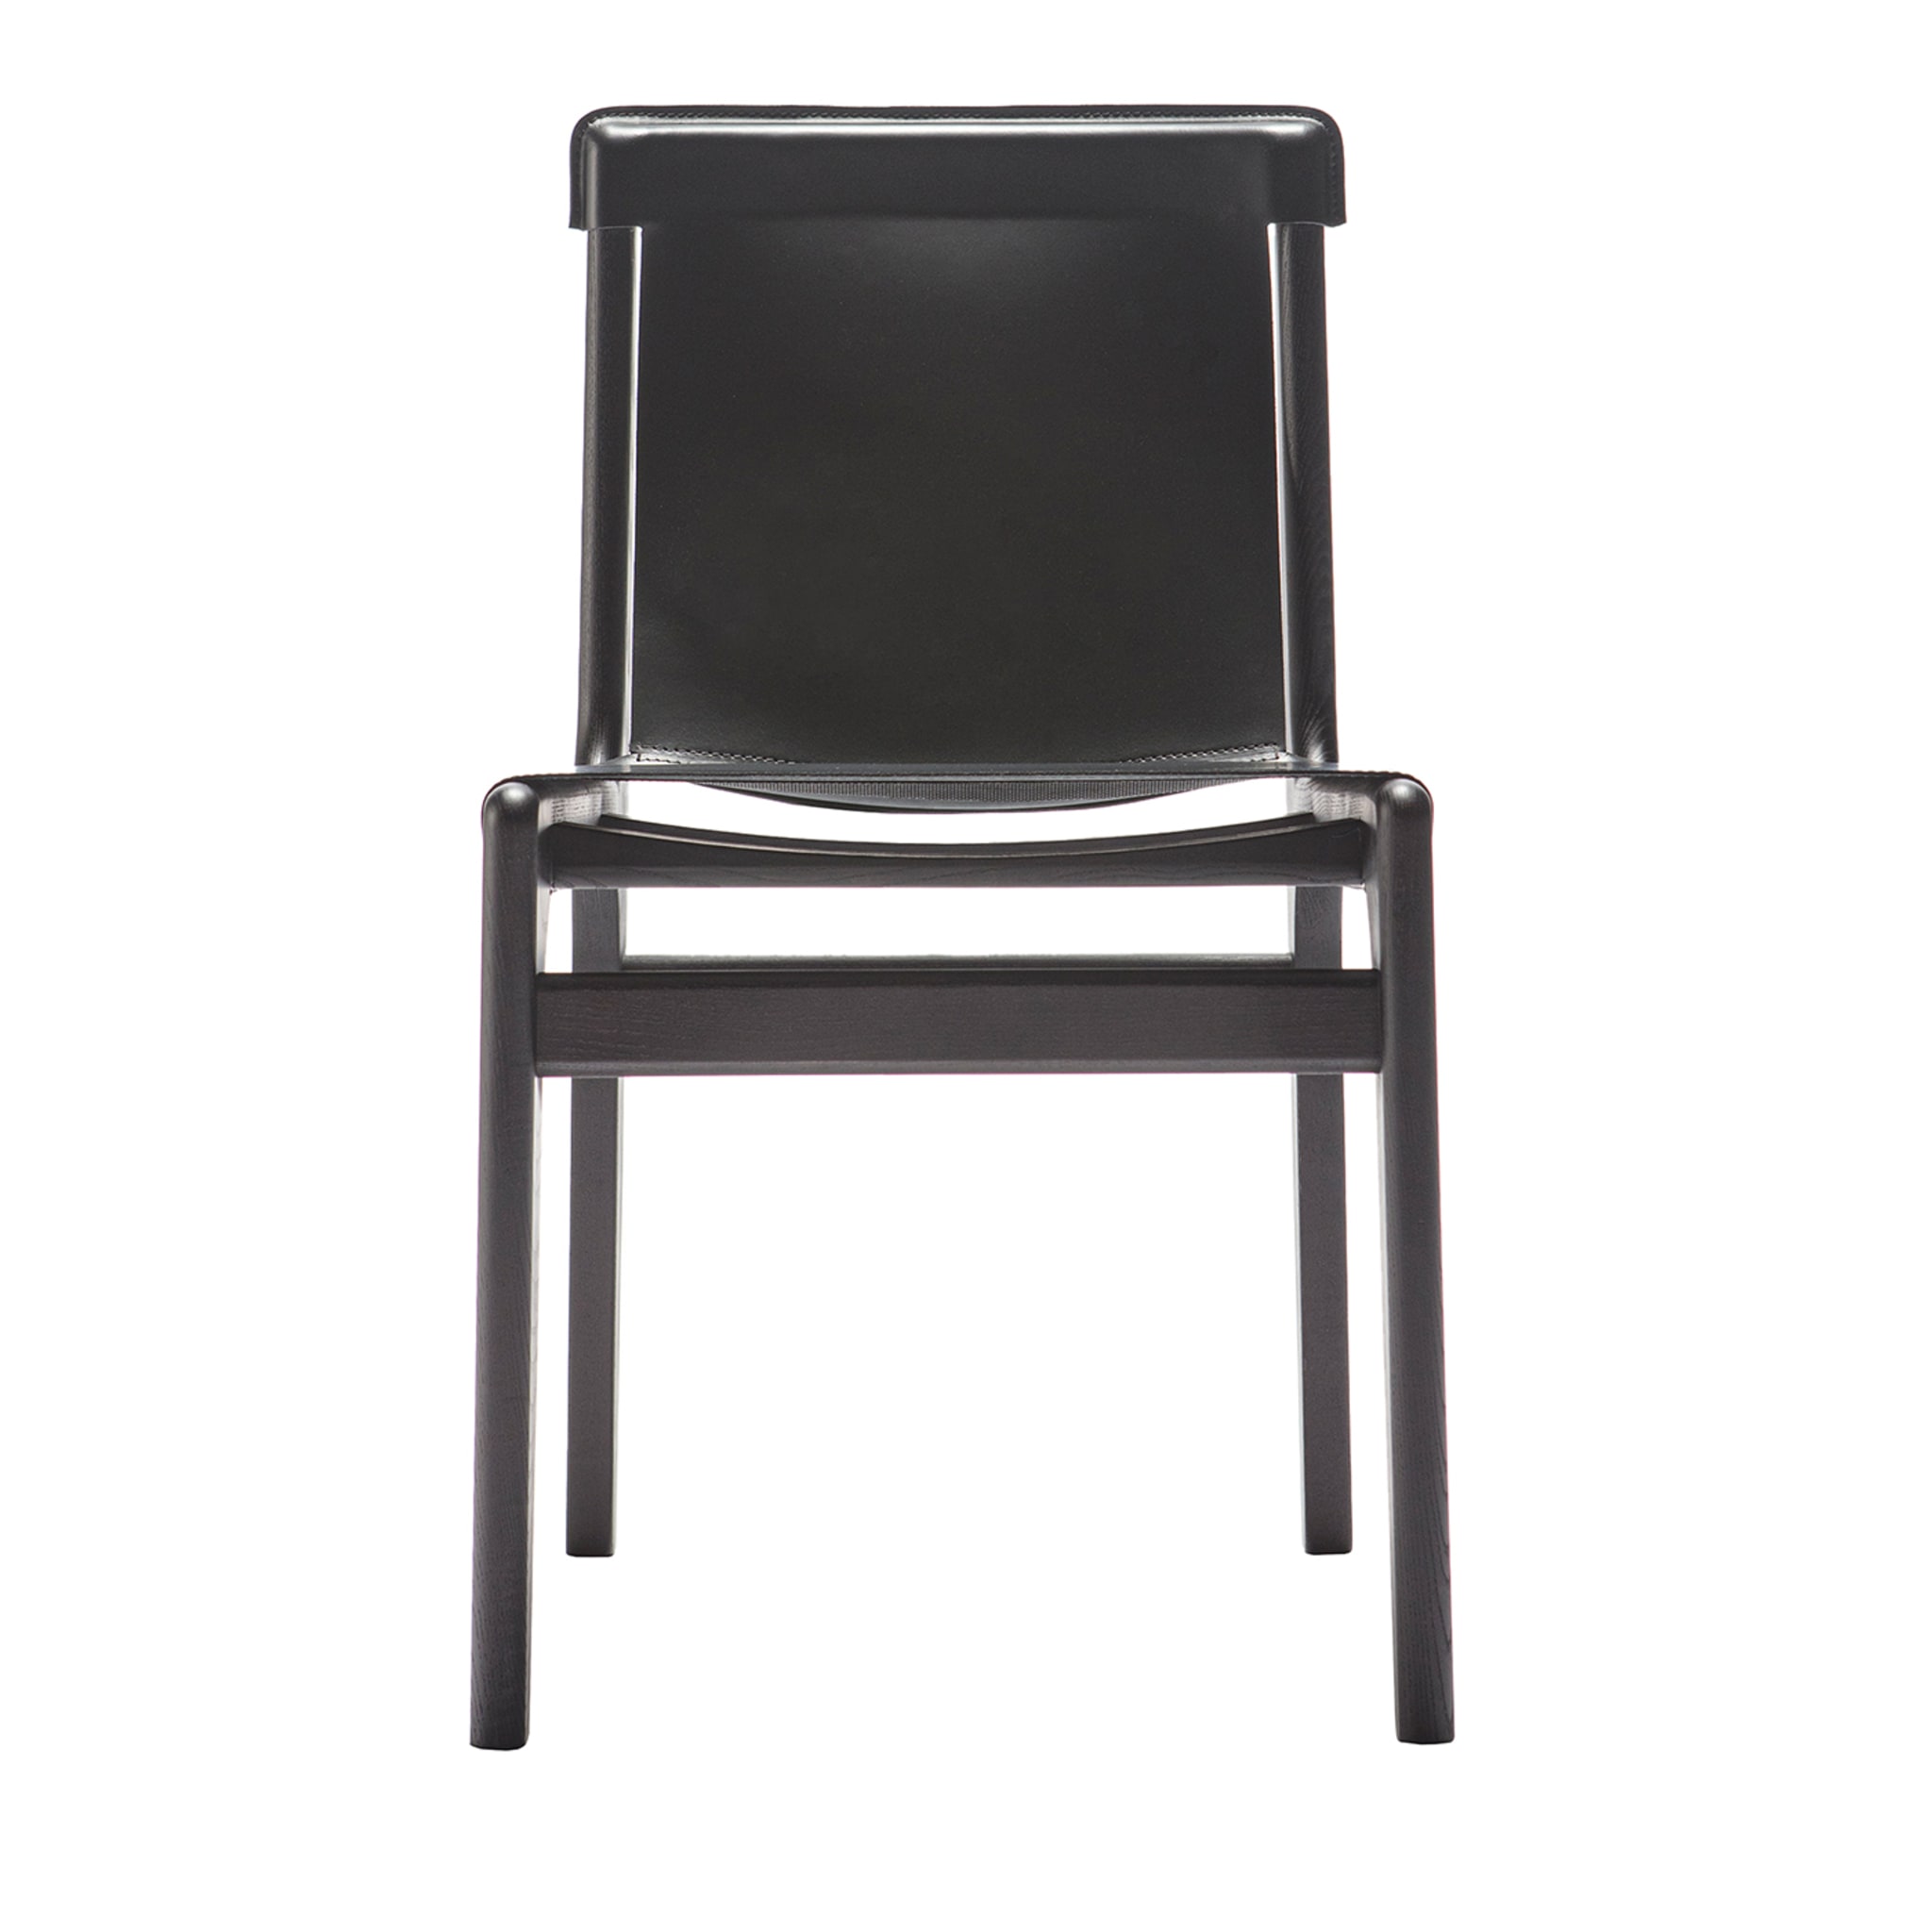 Burano Black Leather Chair by Balutto Associati - Main view